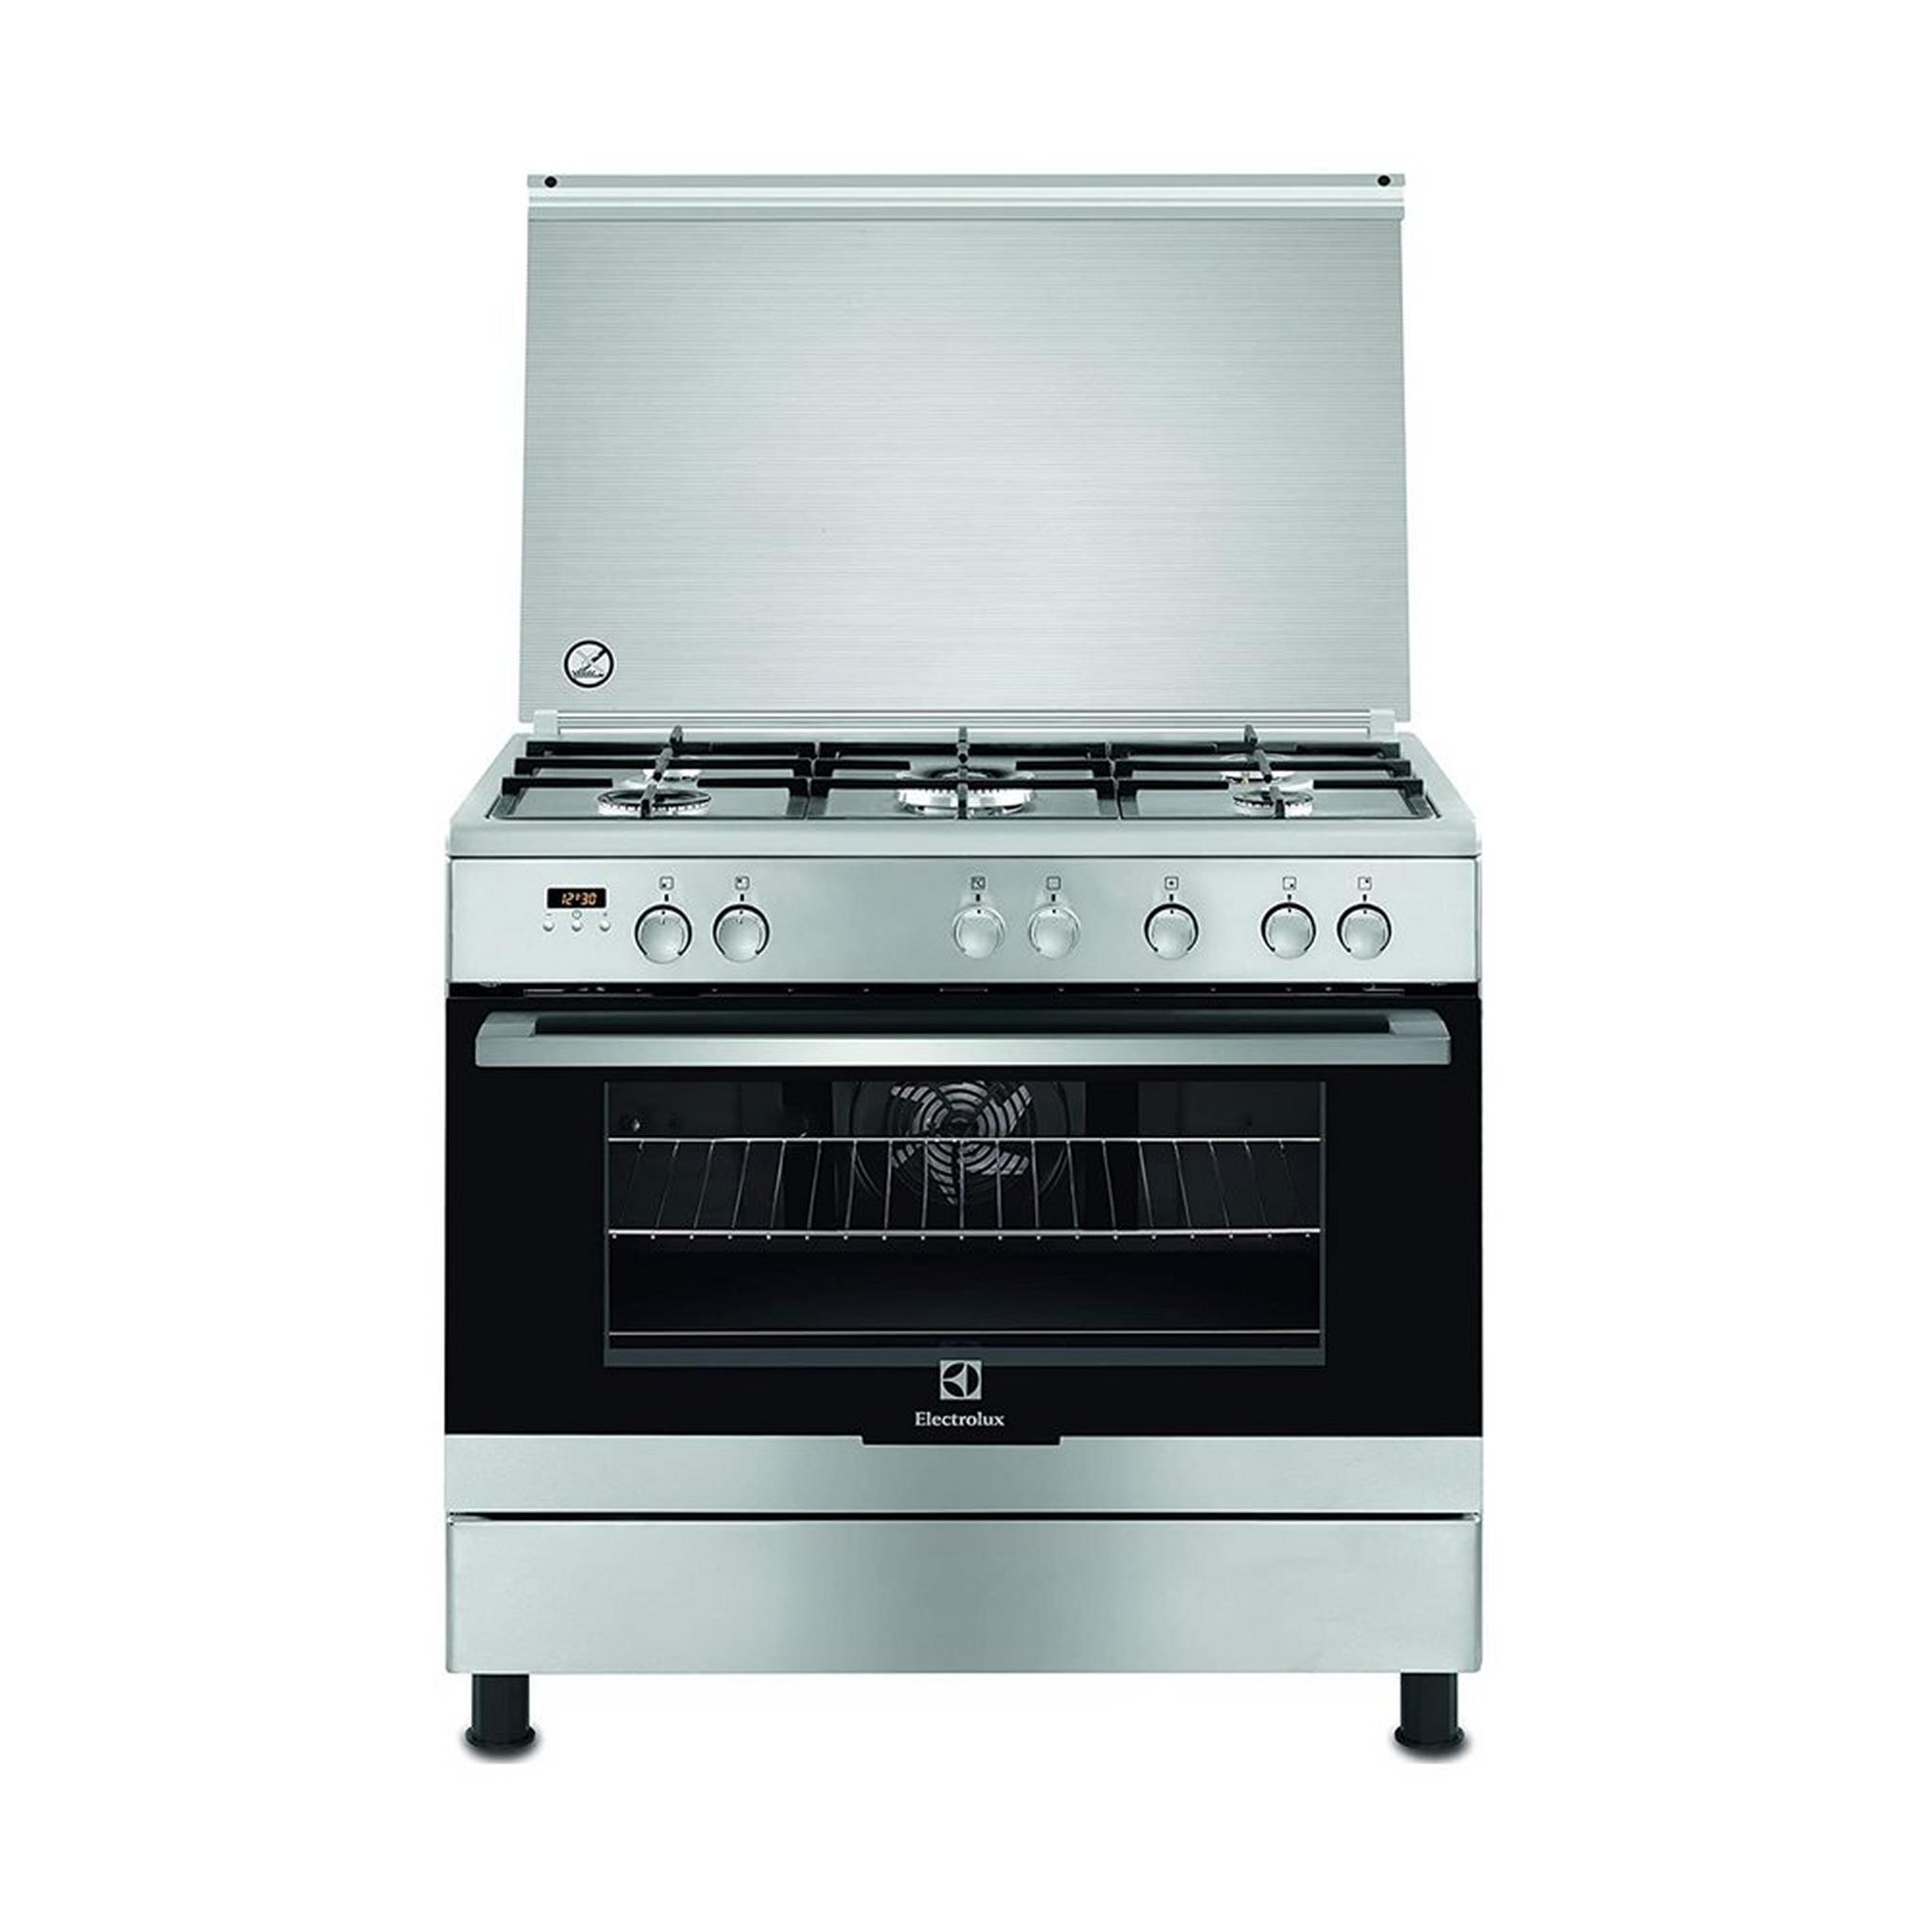 ELECTROLUX 5 Burners Gas Cooker with Electric Oven, 90X60cm, EKK925A0OX - Stainless Steel